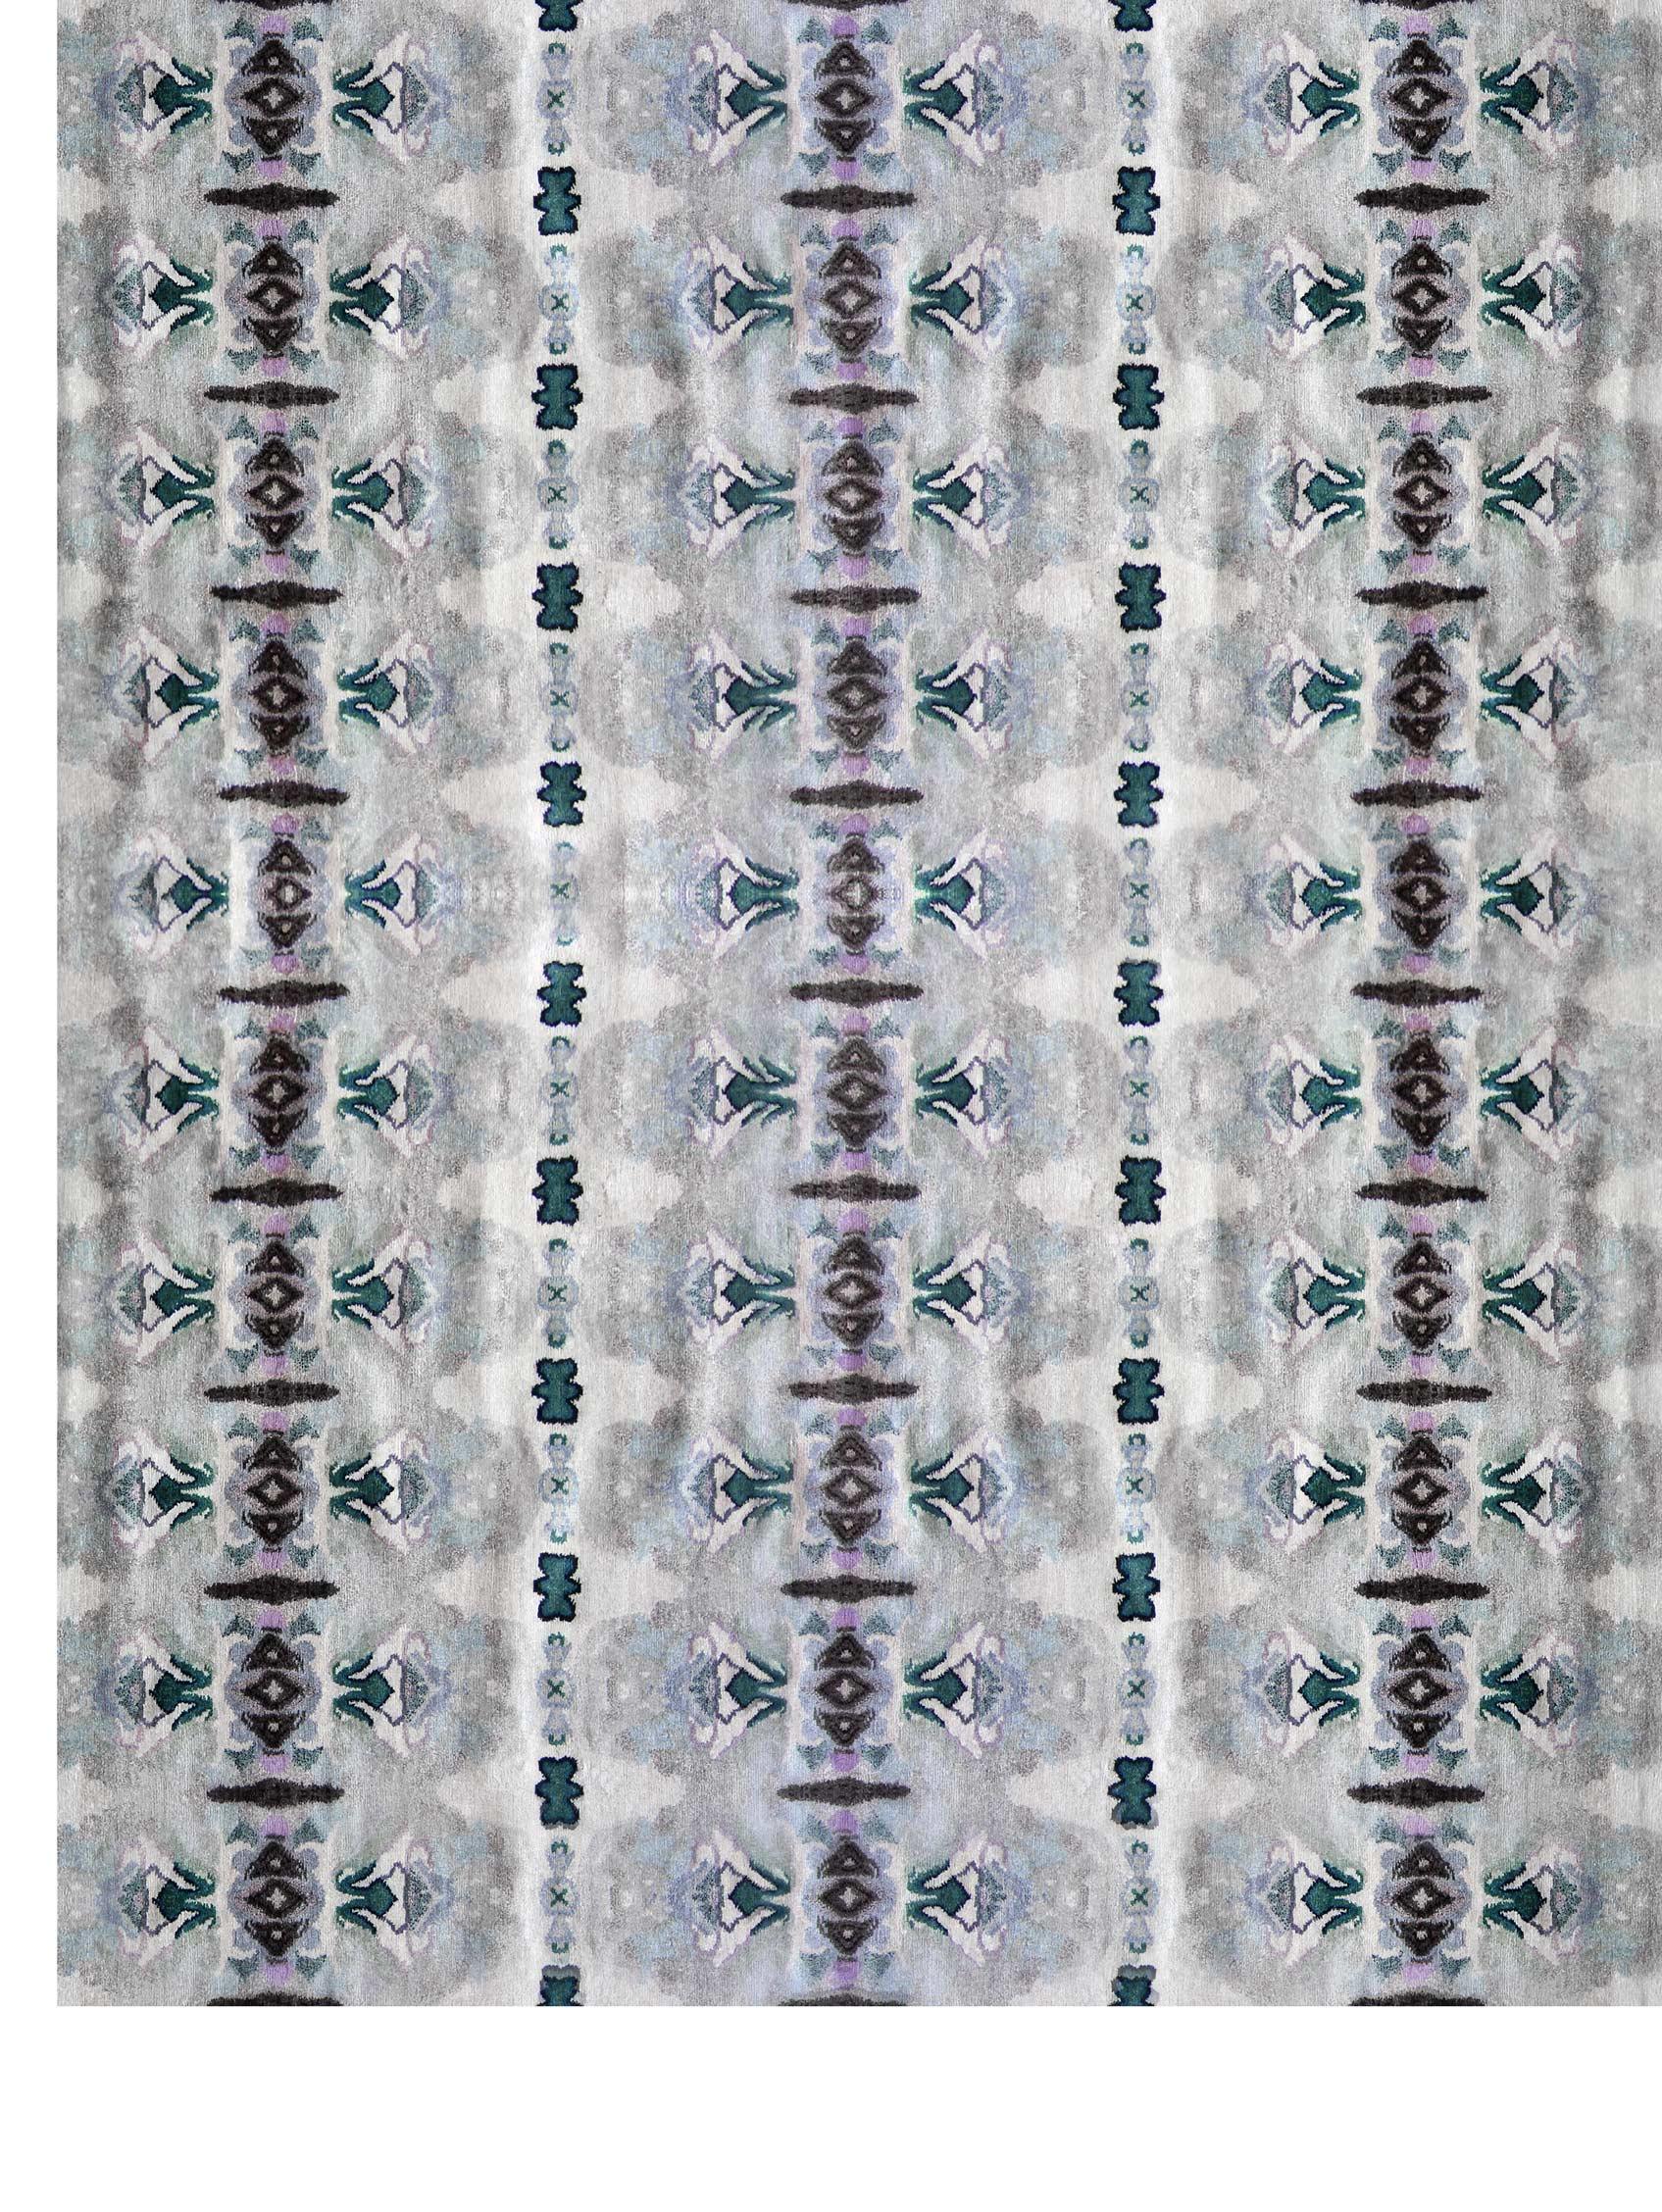 Septaria light hand knotted rug by Eskayel
Dimensions: D 8' x H 10'
Materials: Wool matka silk blend.

Eskayel hand knotted rugs are woven to order and can be customized in various sizes, colors, materials, and weave constructions.

Eskayel is